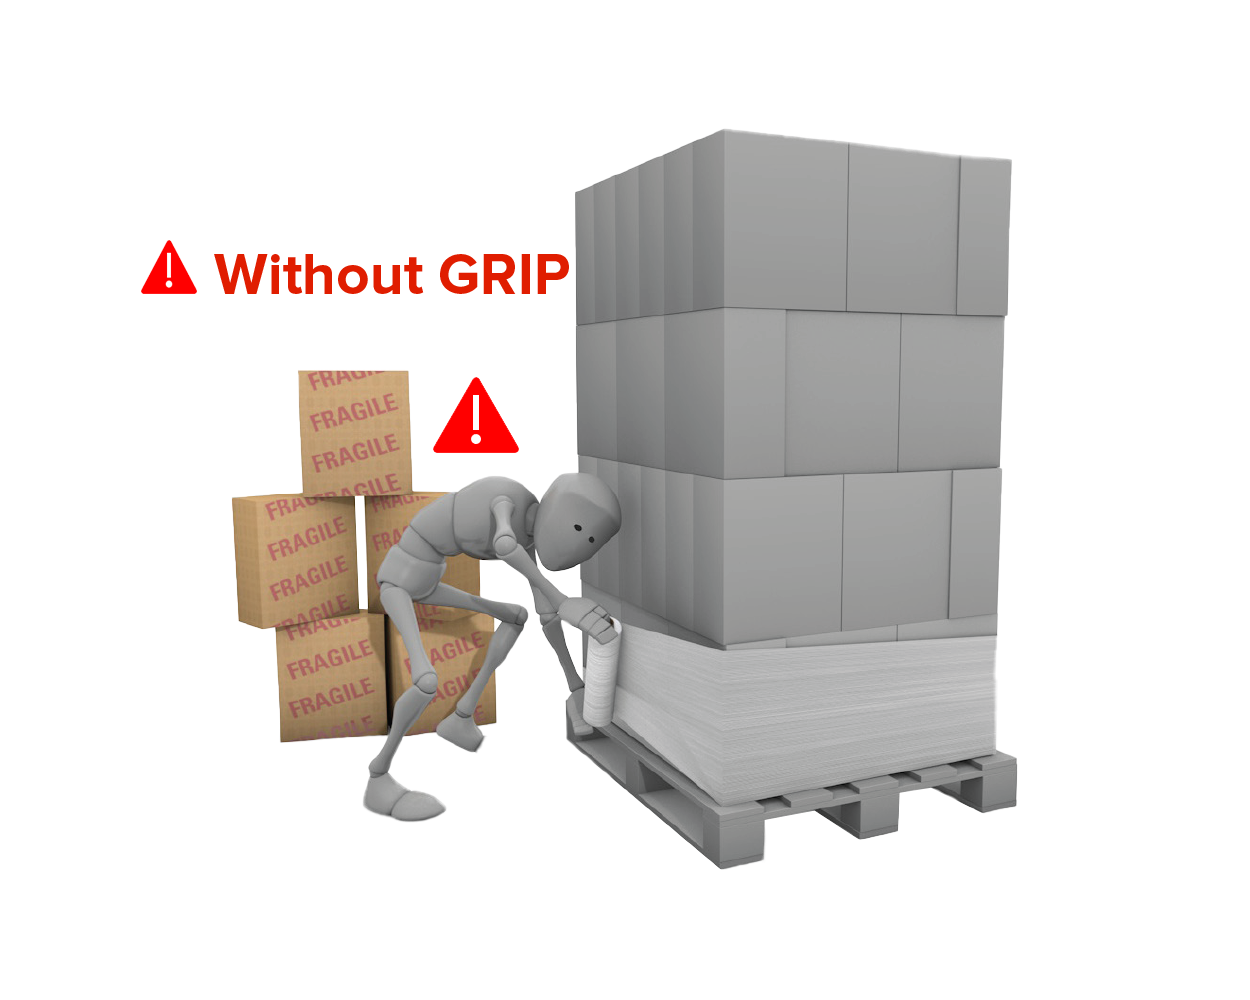 Standard pallet wrap without GRIP